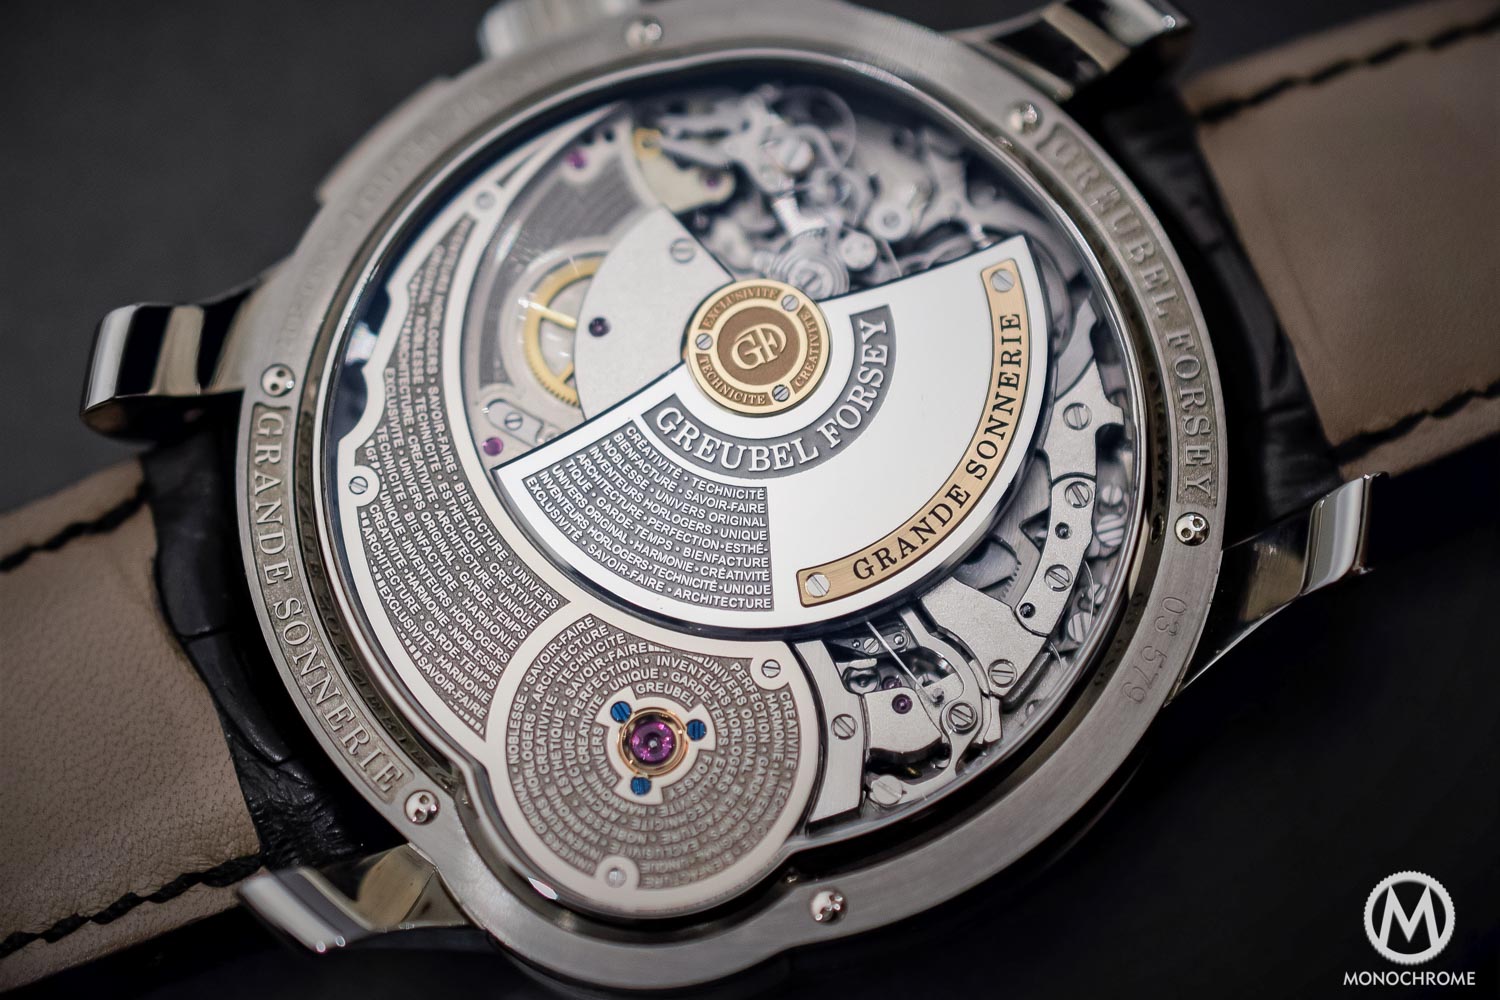 Greubel Forsey Grande Sonnerie - SIHH 2017 review